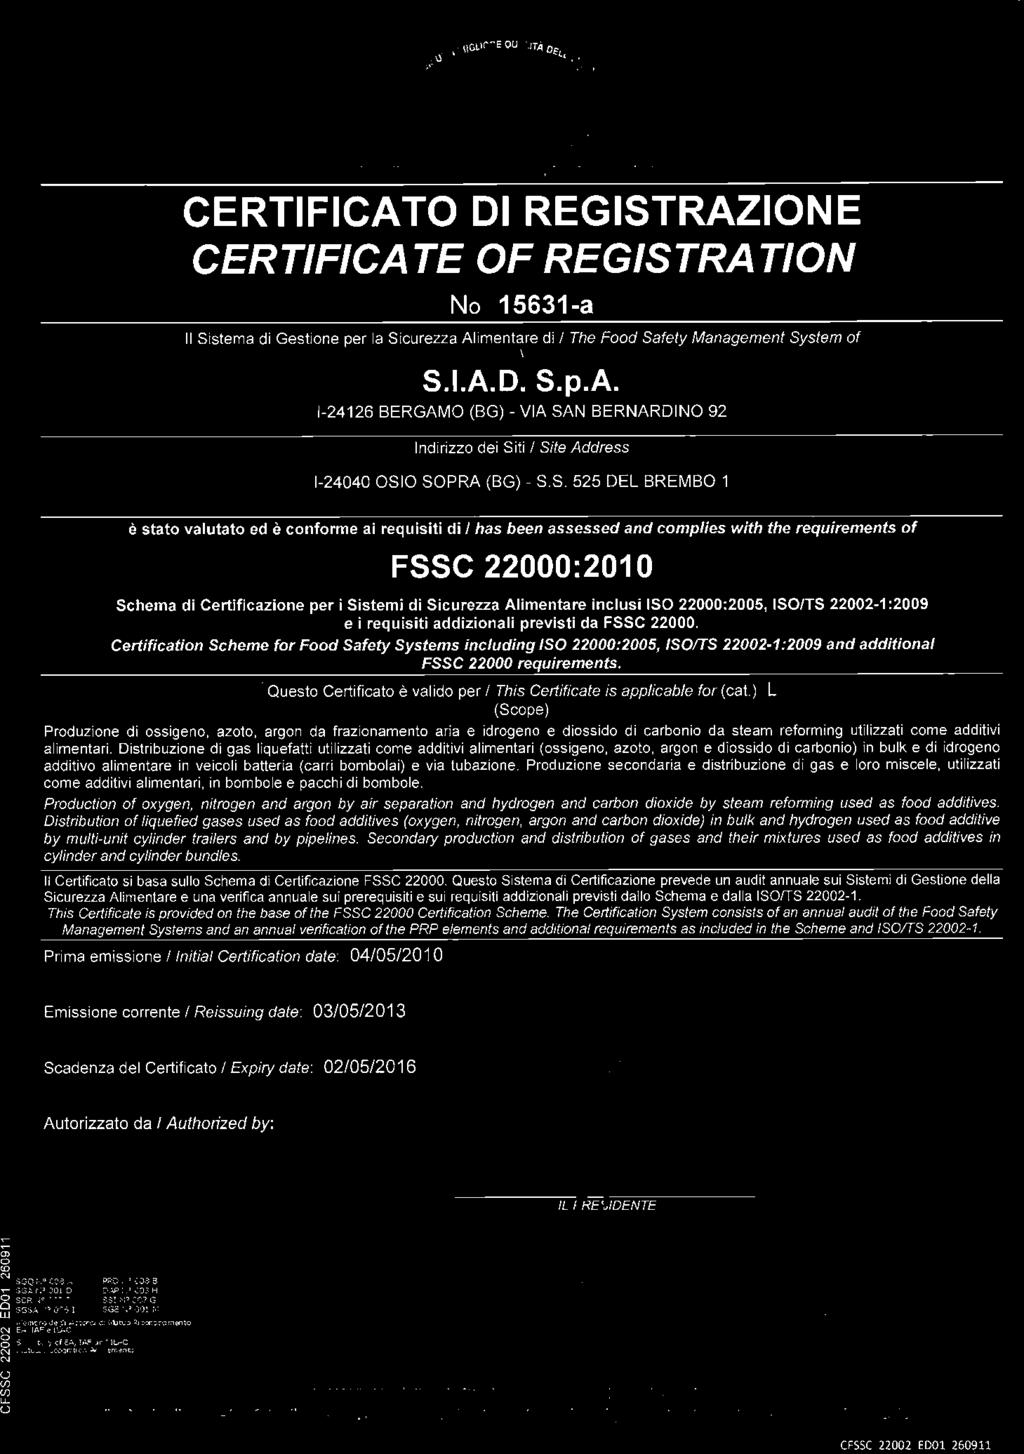 the quality and safety of products. SIAD s gases for food use are certificated according to FSSC 22000 standard.